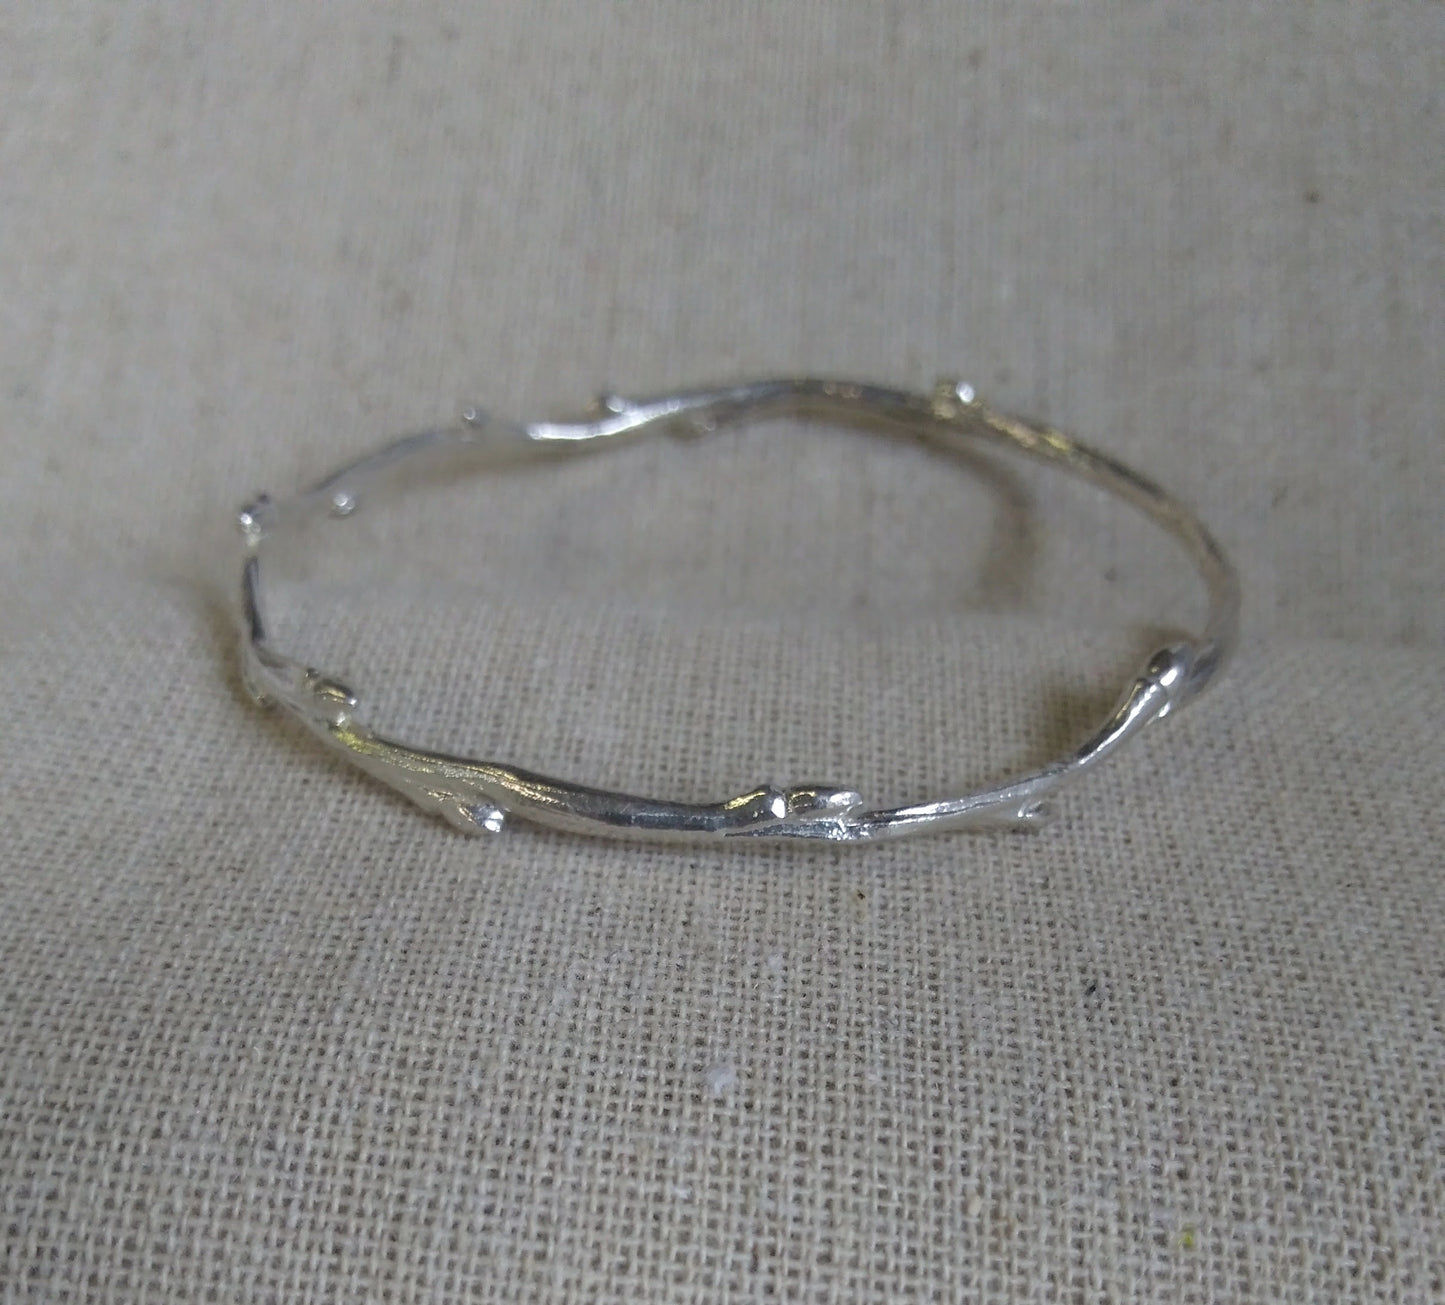 close up of a delicate shiny silver twig with tiny buds alternating along the length, formed as a closed circle bracelet